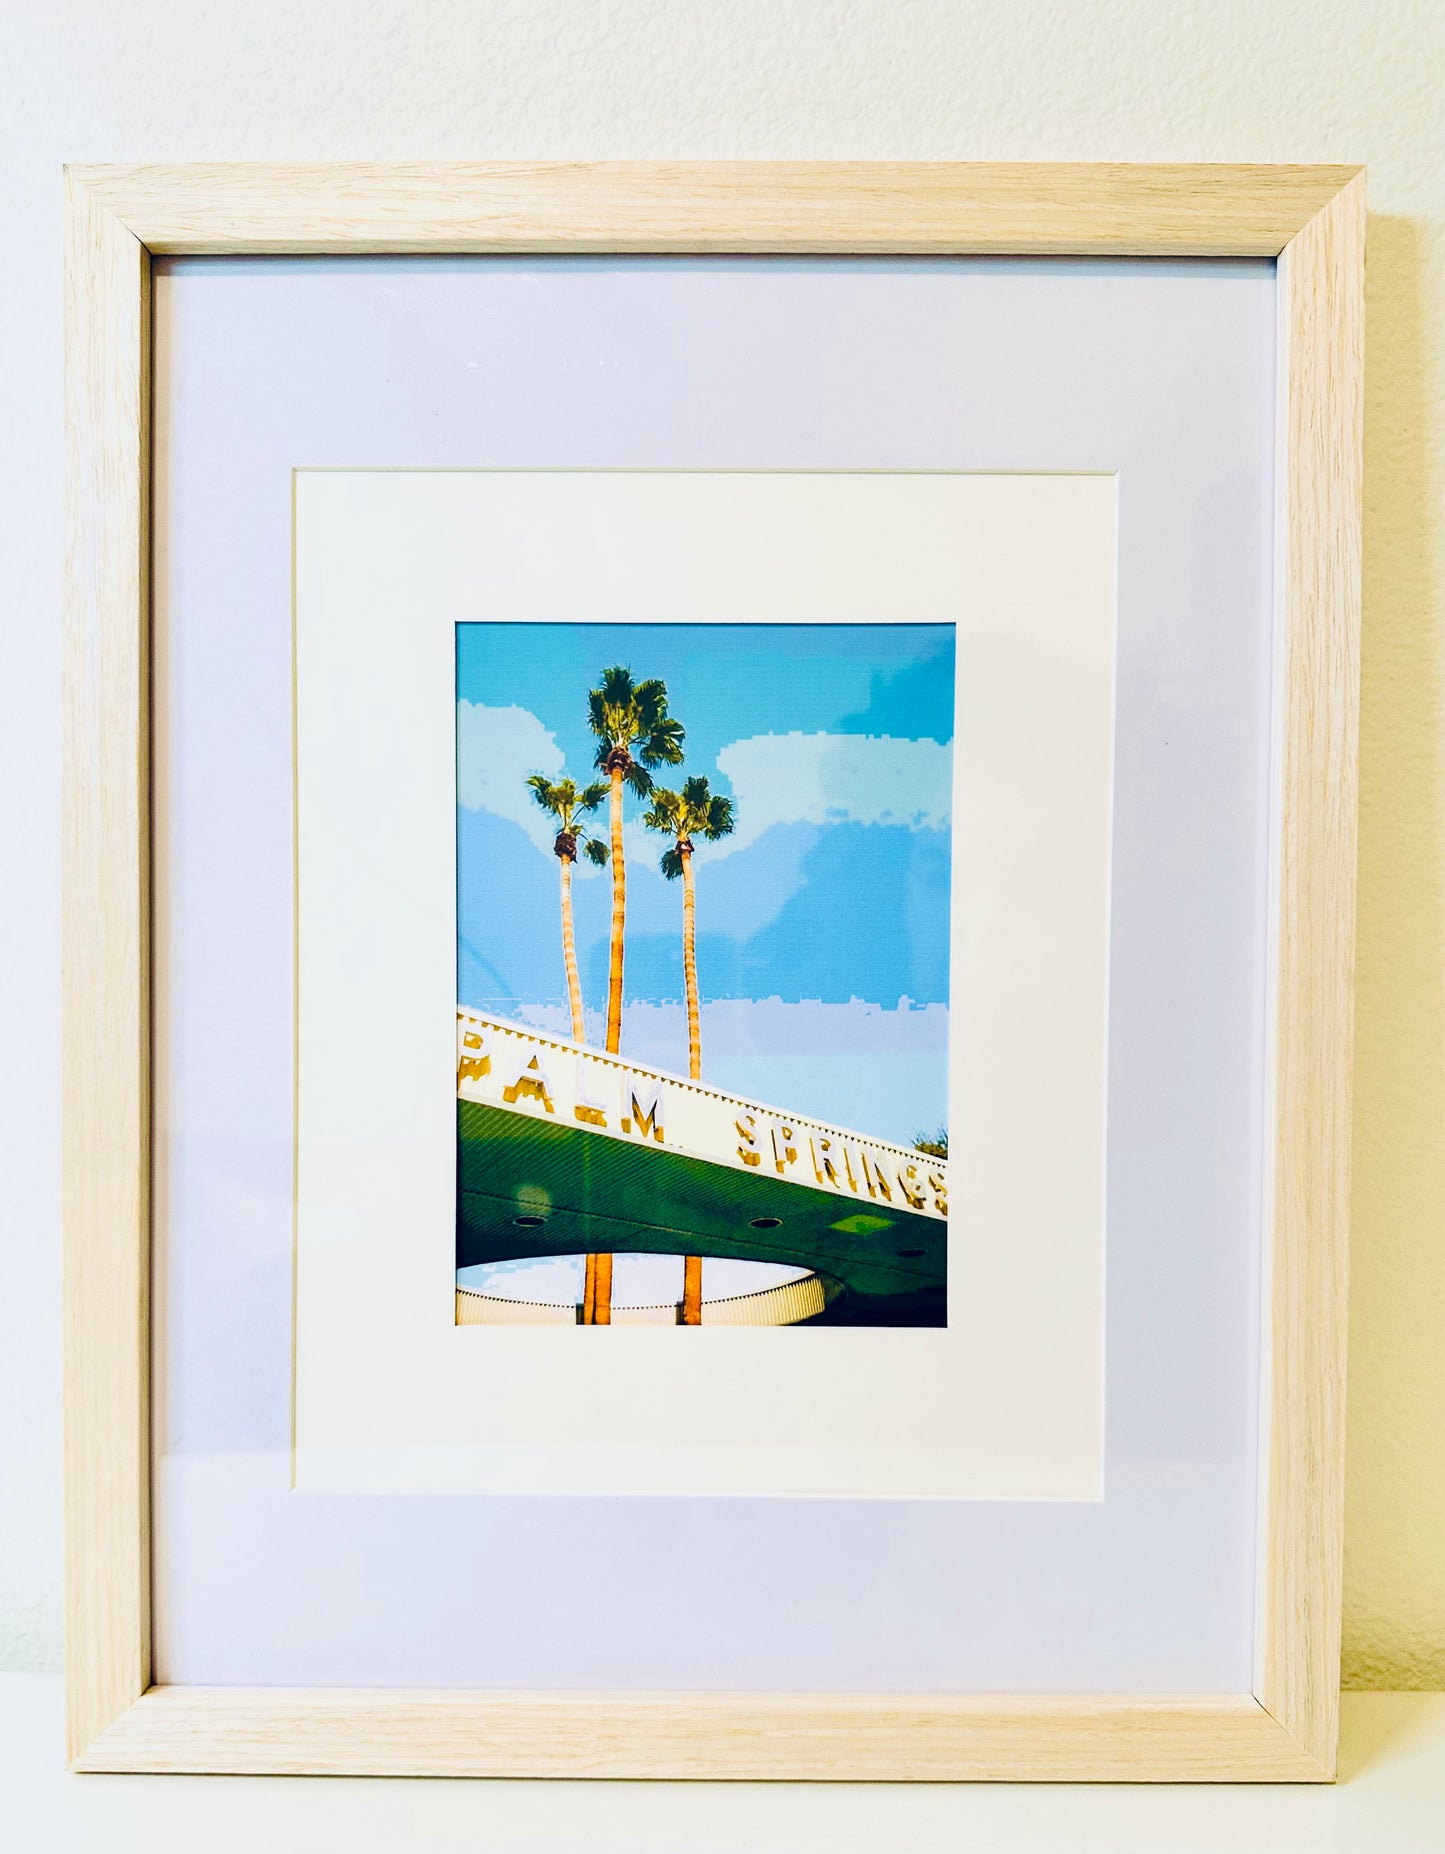 PALM SPRINGS Iconic Sites WELCOME TO PSP Framed Printed Artwork Home Decor